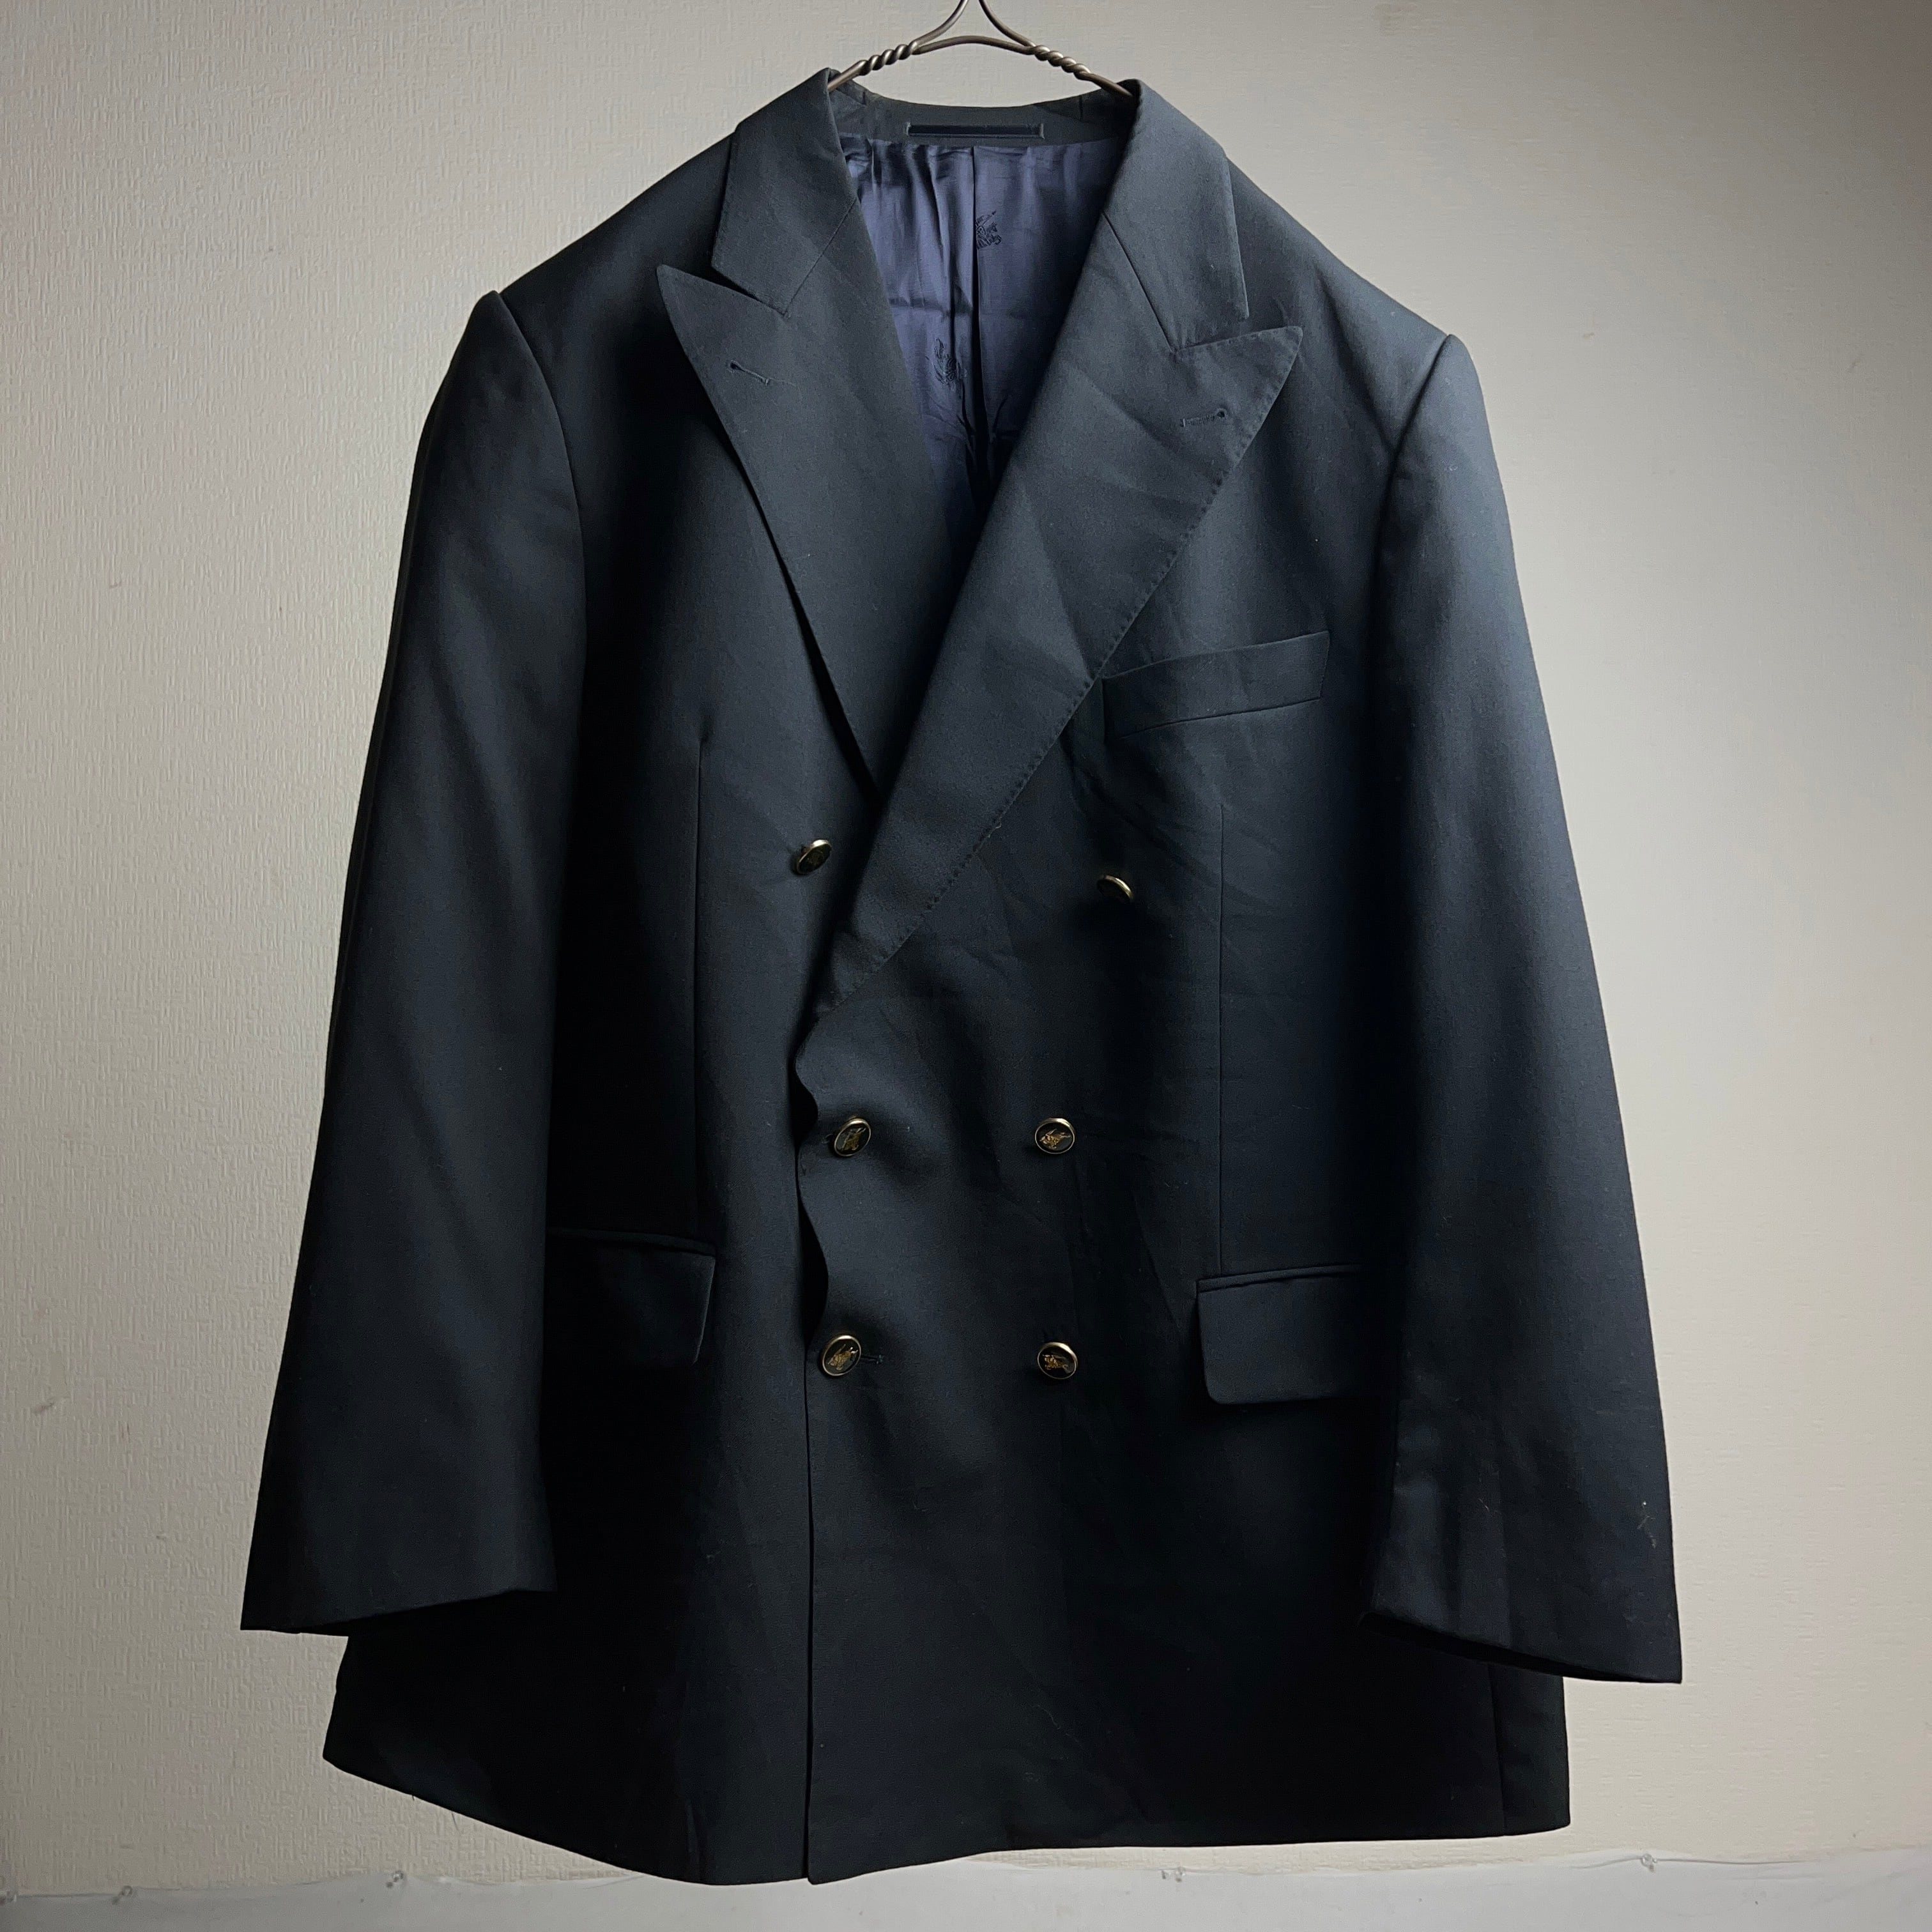 “Burberry London” Double Breaseted Jacket バーバリー ダブル